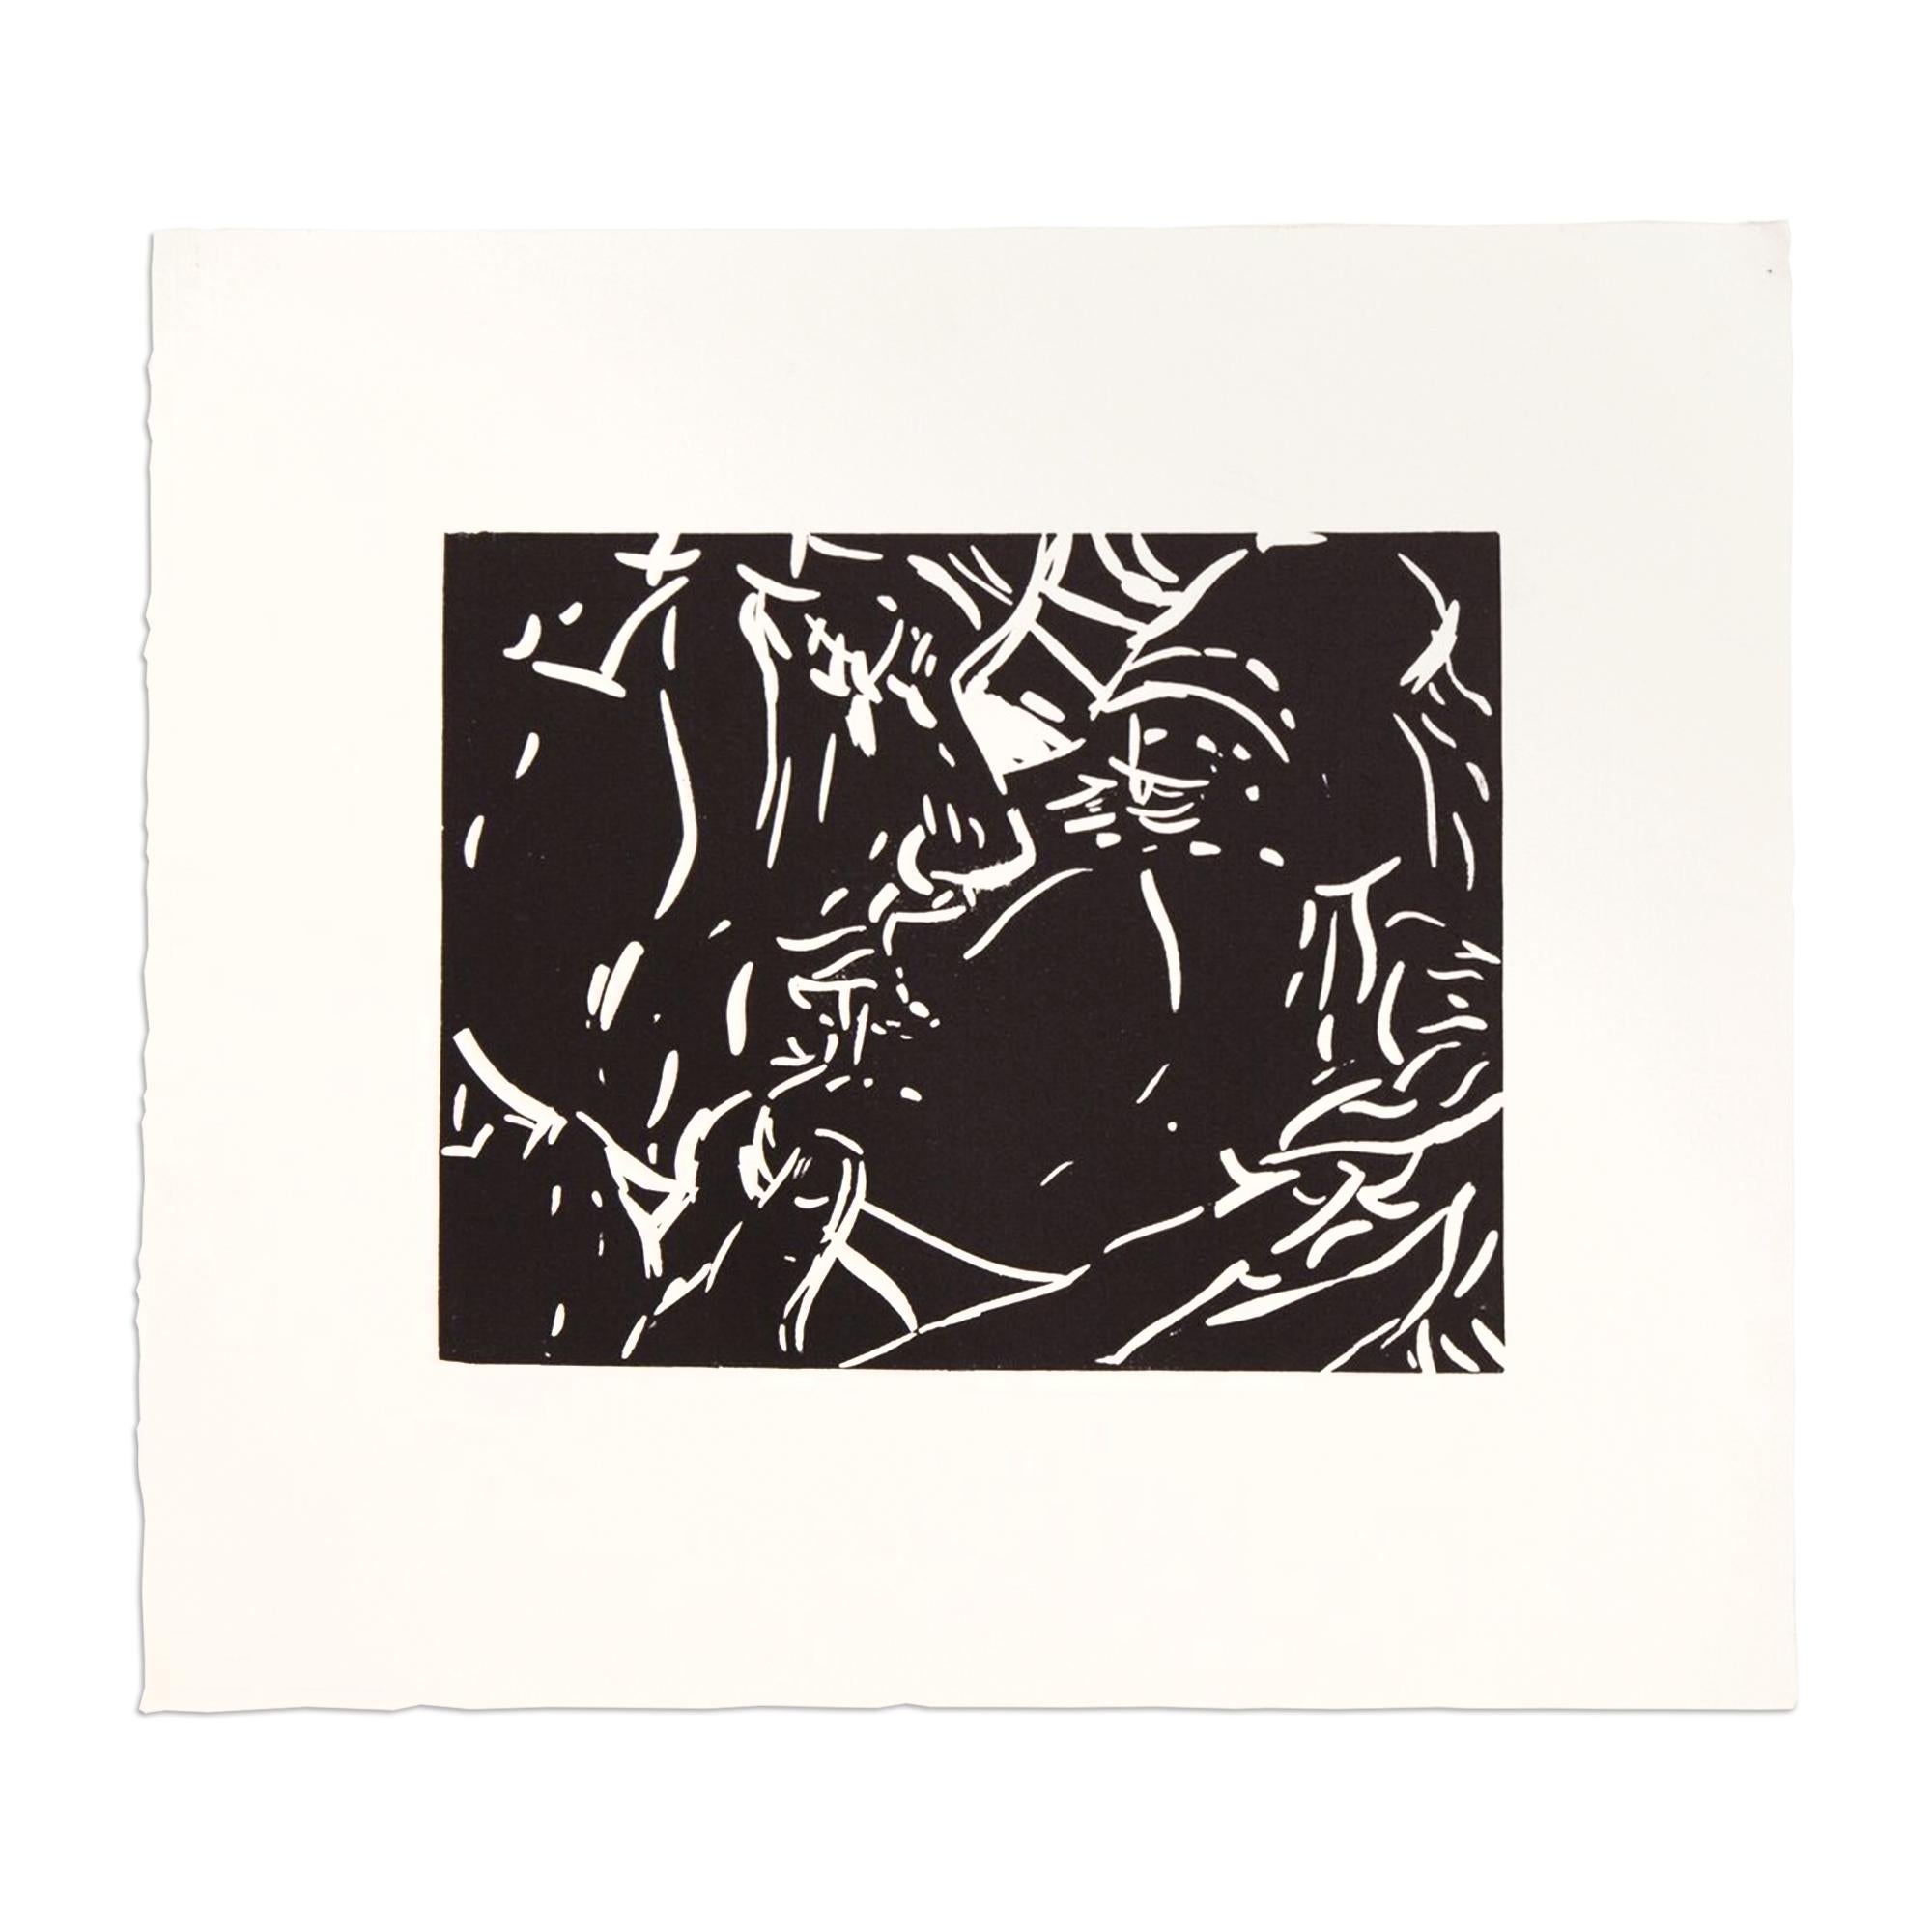 Elizabeth Peyton, The Kiss - Etching, Contemporary Art, Signed Print